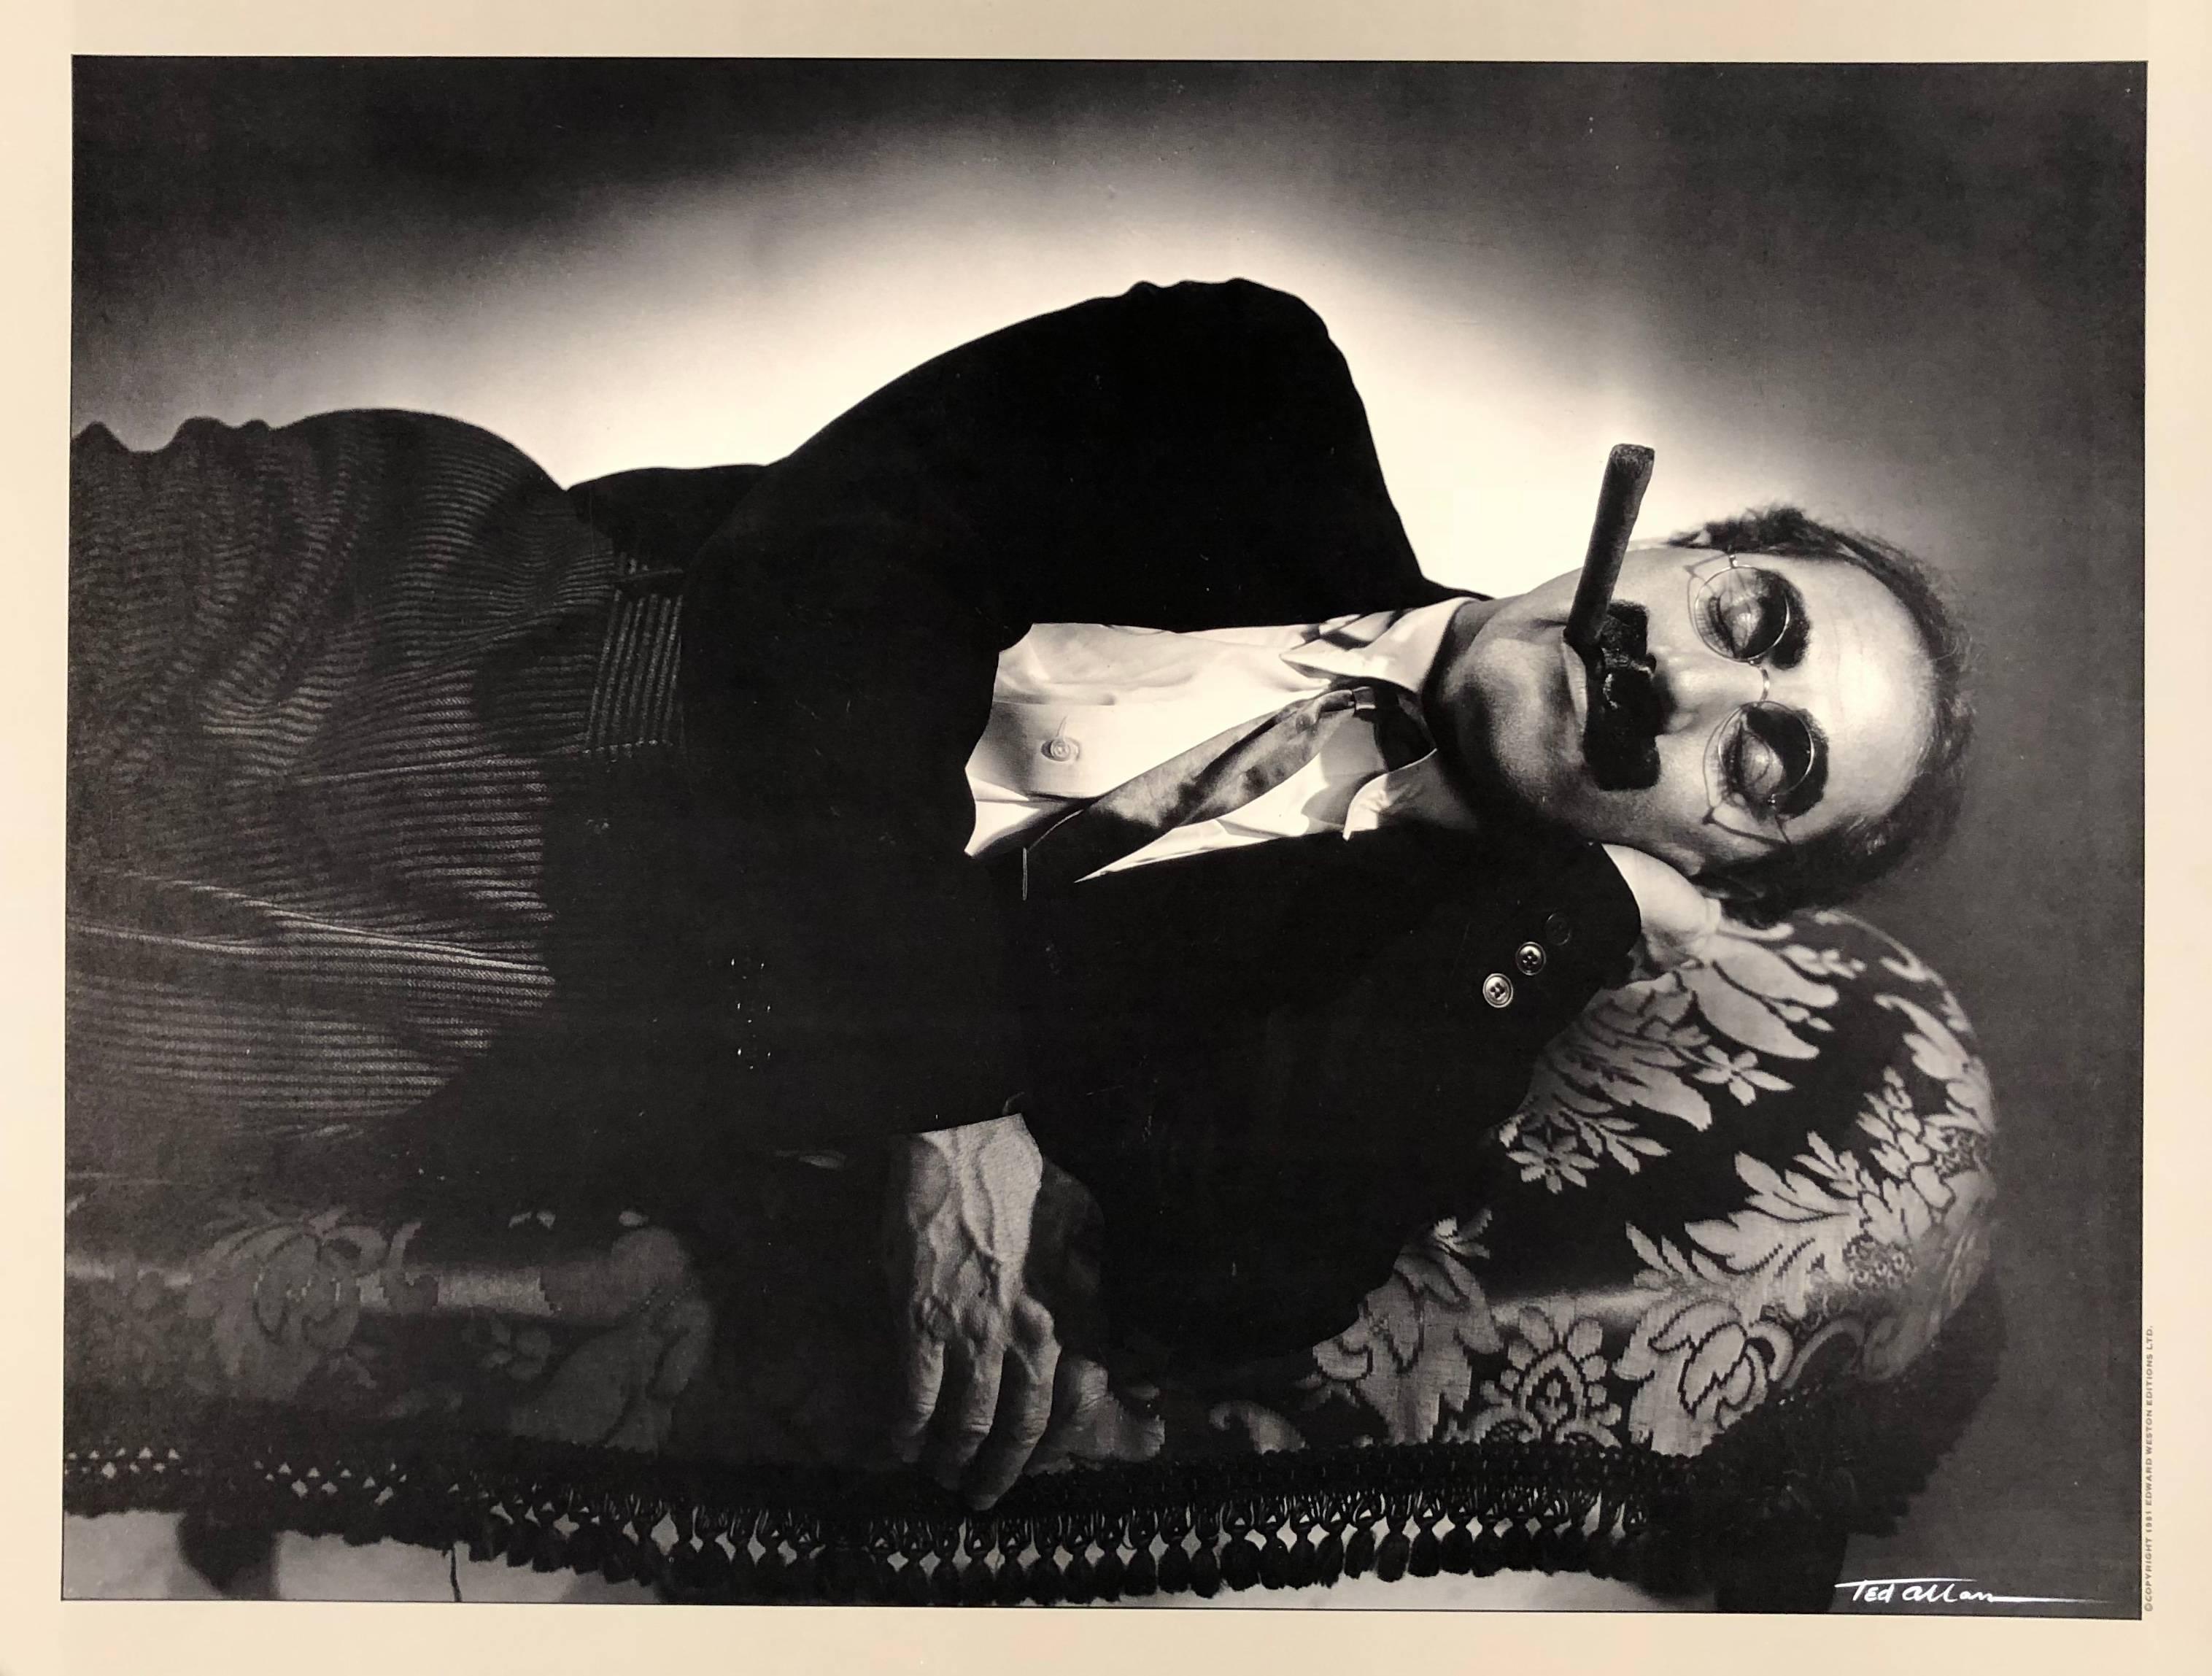 This piece is a photolithograph from the original negative by Ted Allan, originally shot in 1935 and printed at a later date.  It depicts Julius Henry Marx, known professionally as Groucho Marx, who was an American comedian, writer, stage, film,